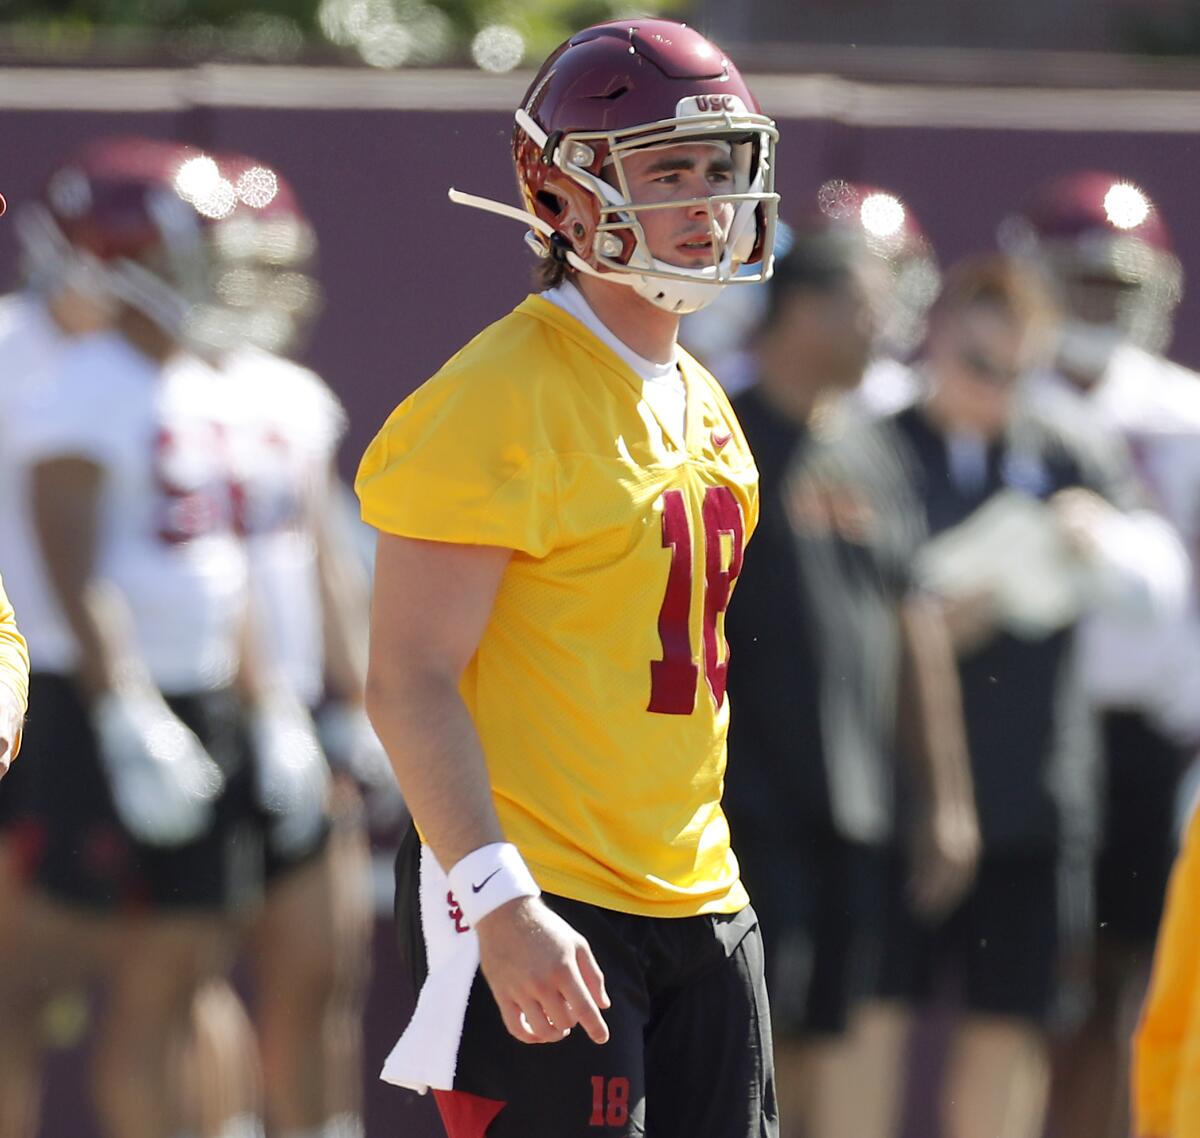 USC quarterback JT Daniels reports to the opening of training camp at USC on Friday. A product of Santa Ana Mater Dei High School, Daniels started for the Trojans last season. 